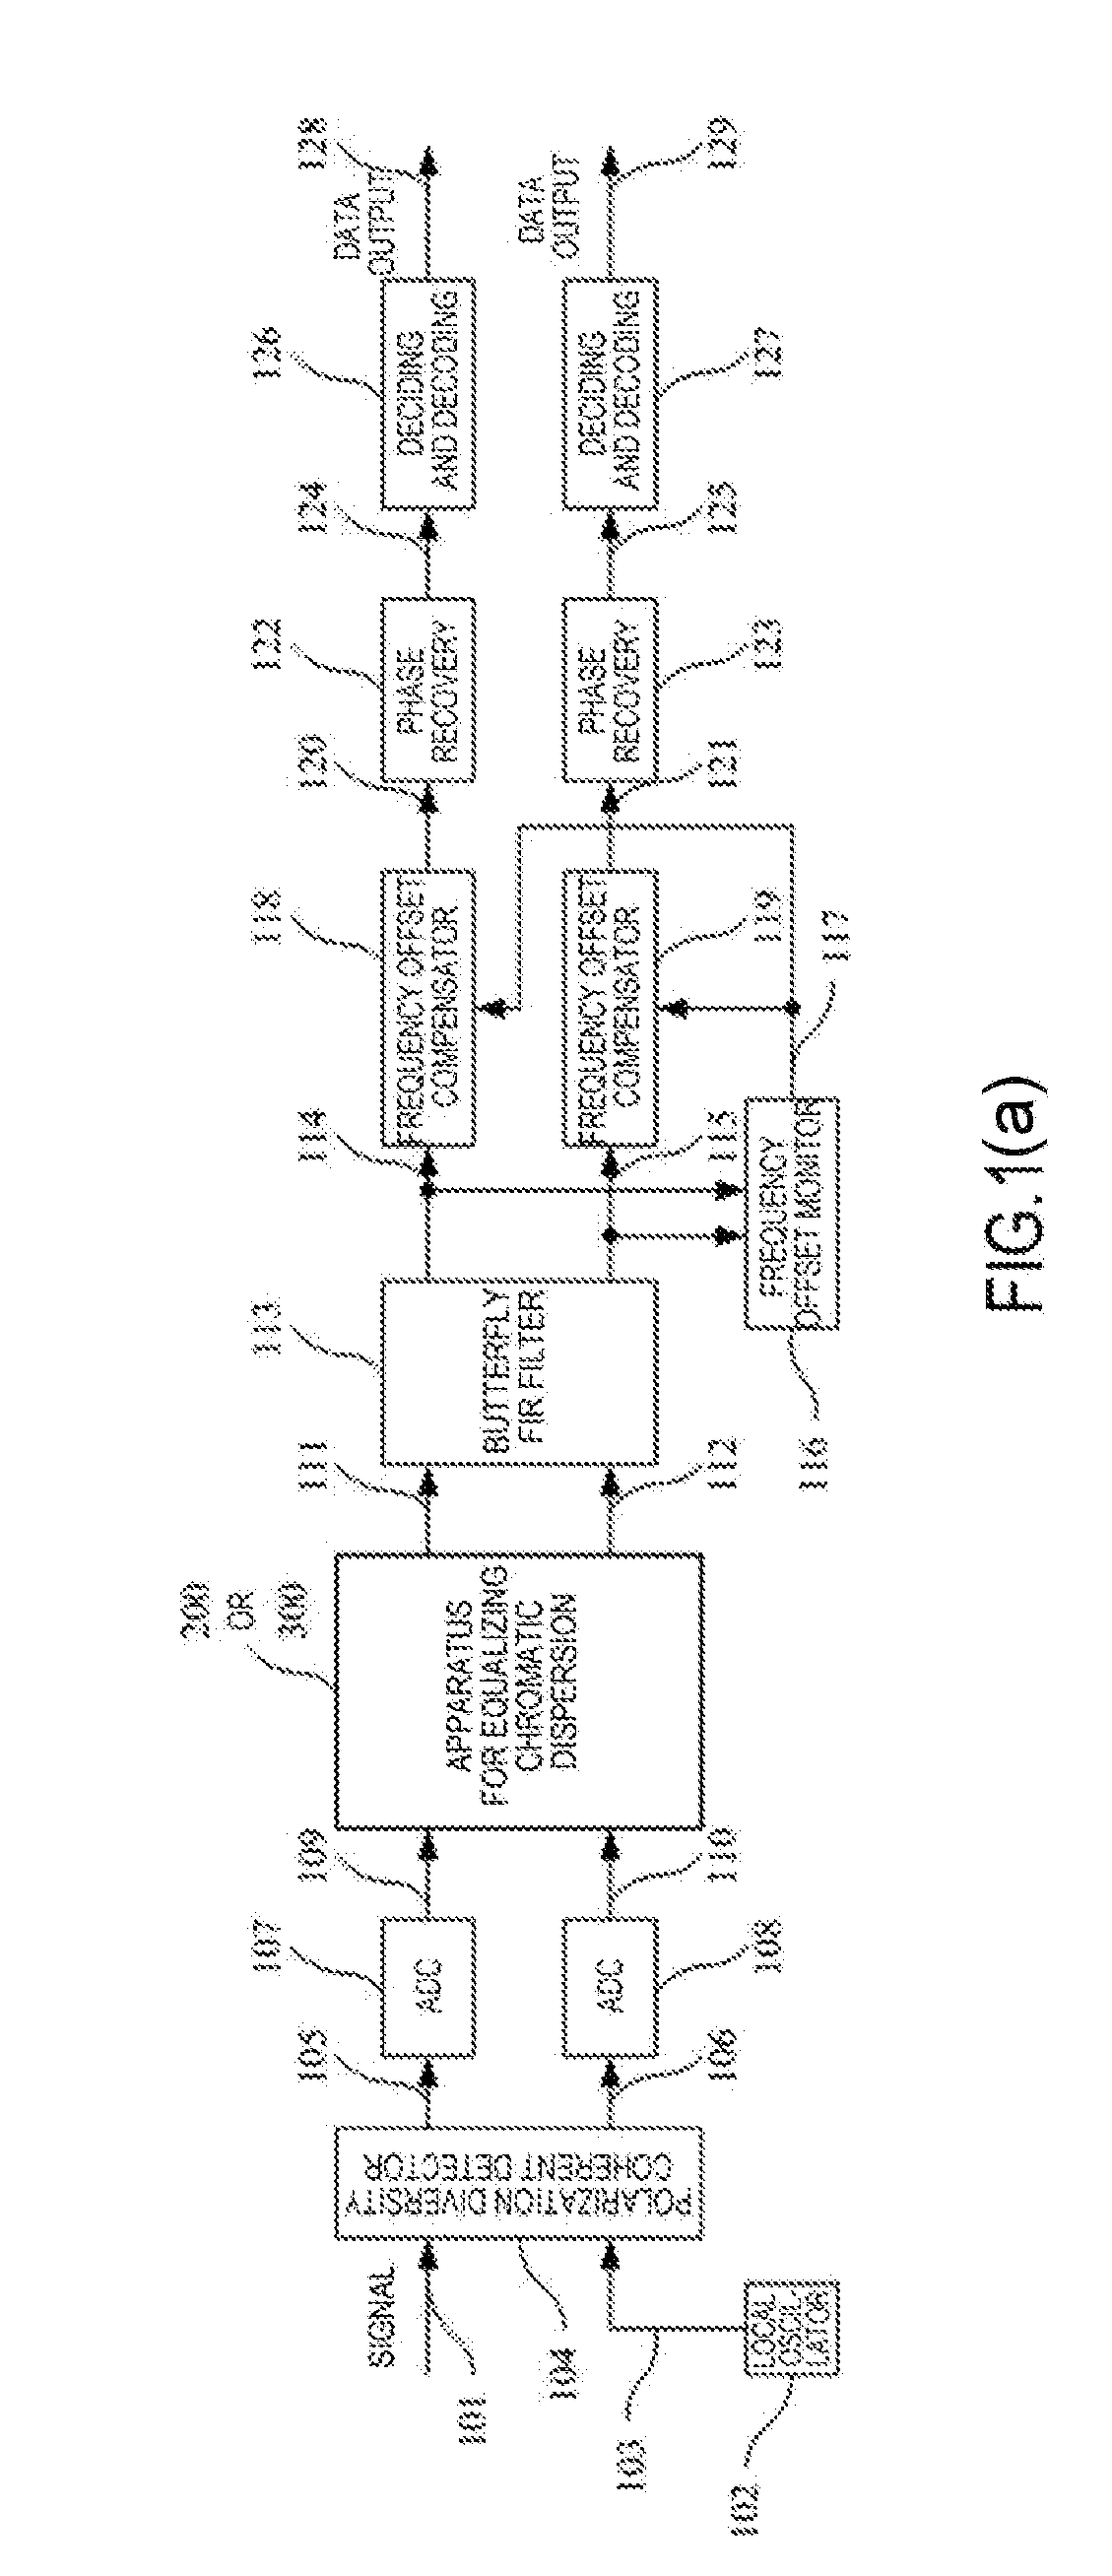 Apparatus and method for equalizing chromatic dispersion and digital coherent optical receiver